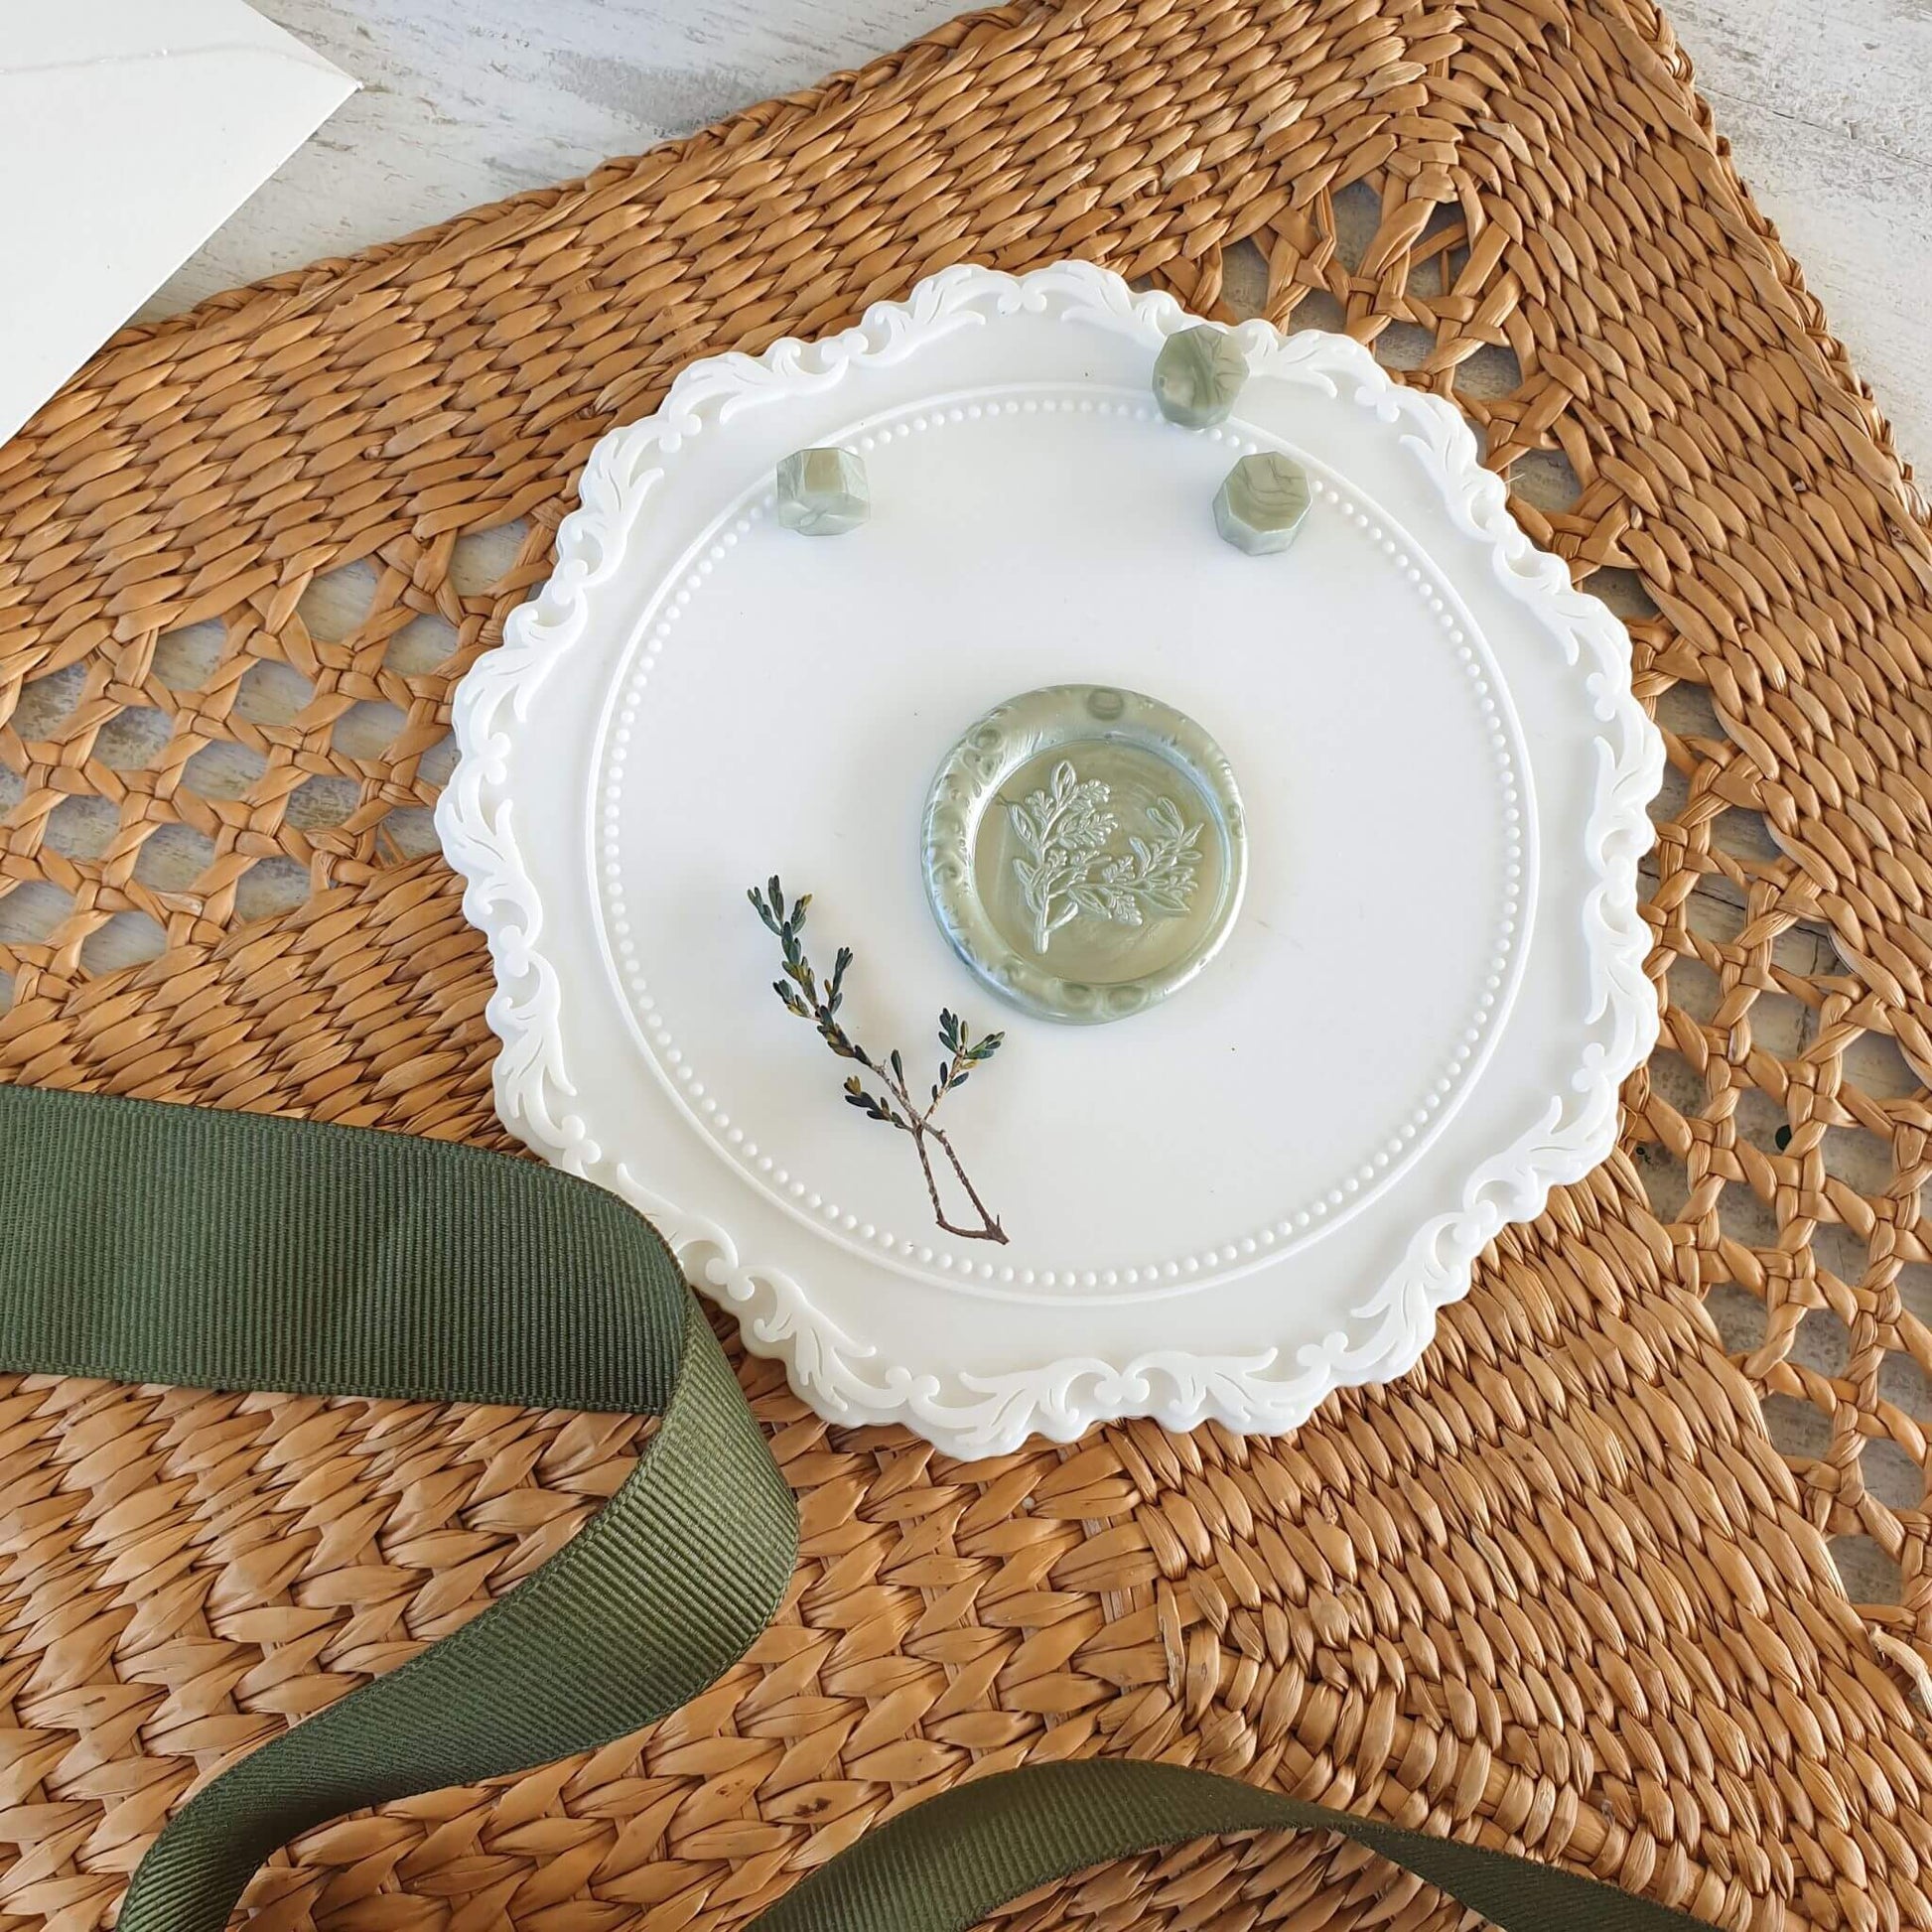 Sage green wax seal on white wax sealing mat with olive green ribbon, sage green wax sealing beads, dried flowers and rattan mat